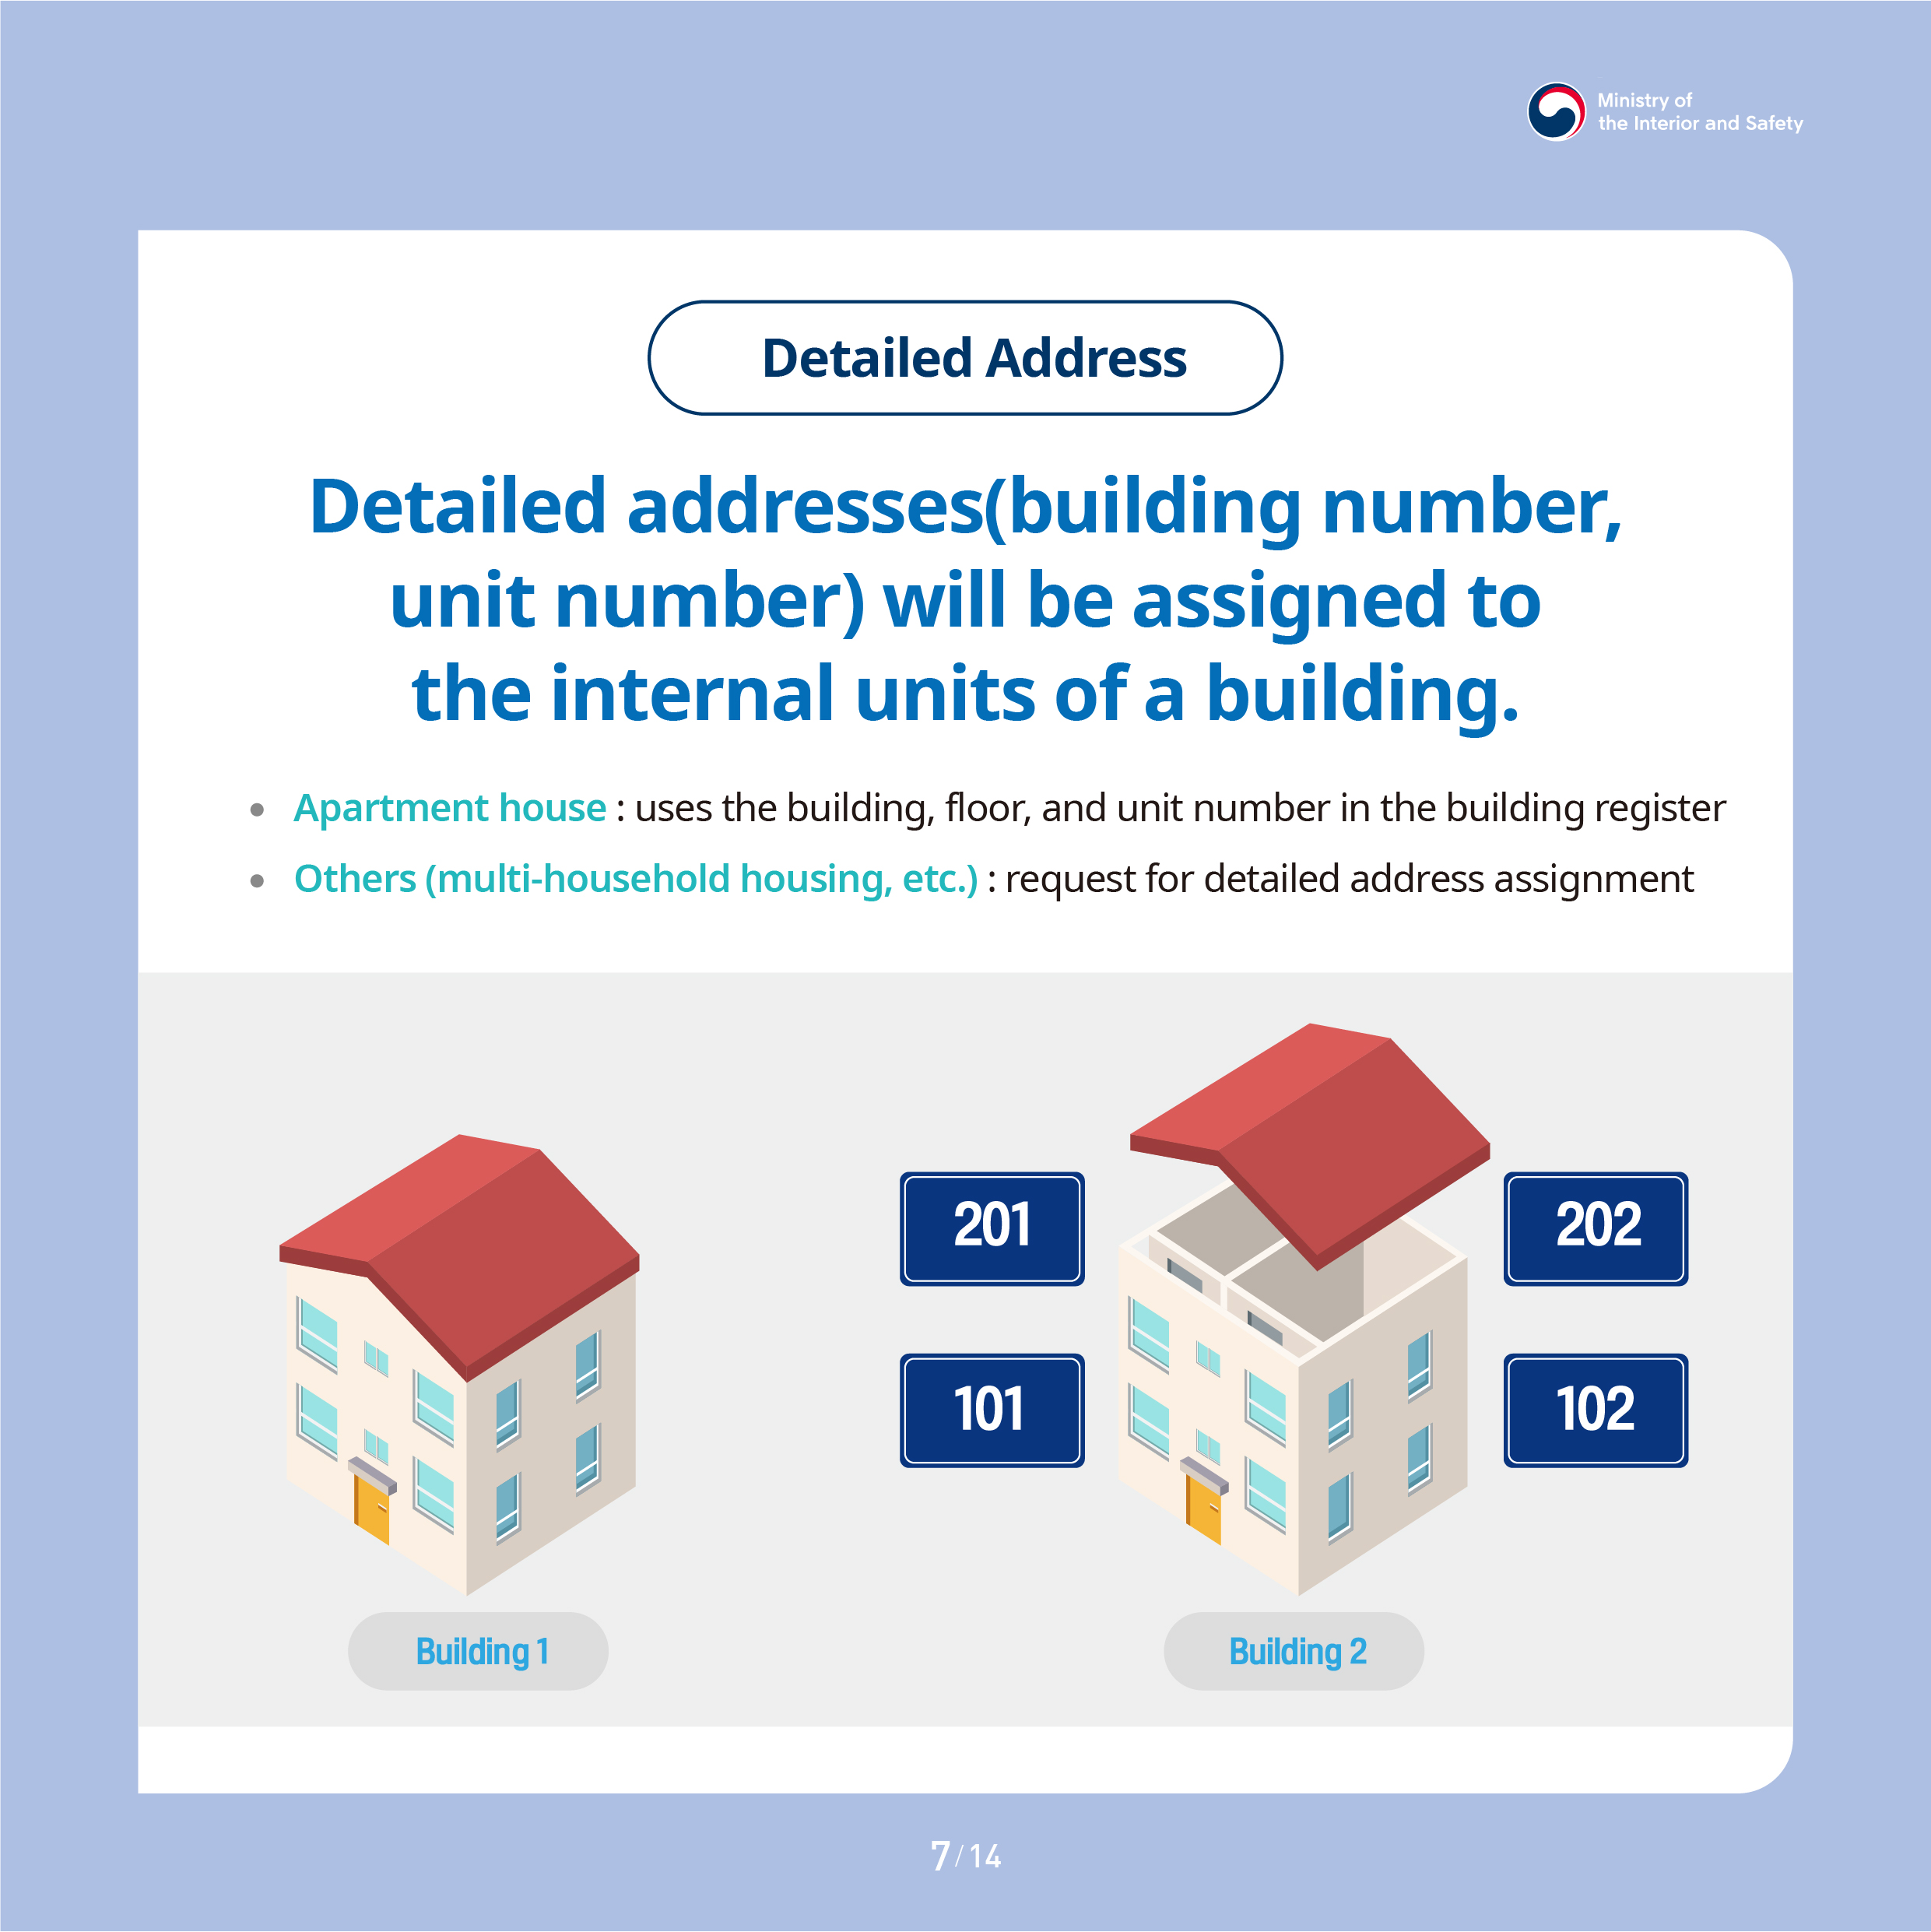 Detailed Address. Detailed addresses(building number, unit number) will be assigned to the internal units of a building. Apartment house : uses the building, floor, and unit number in the building register. Others (multi-household housing, etc.) : request for detailed address assignment.